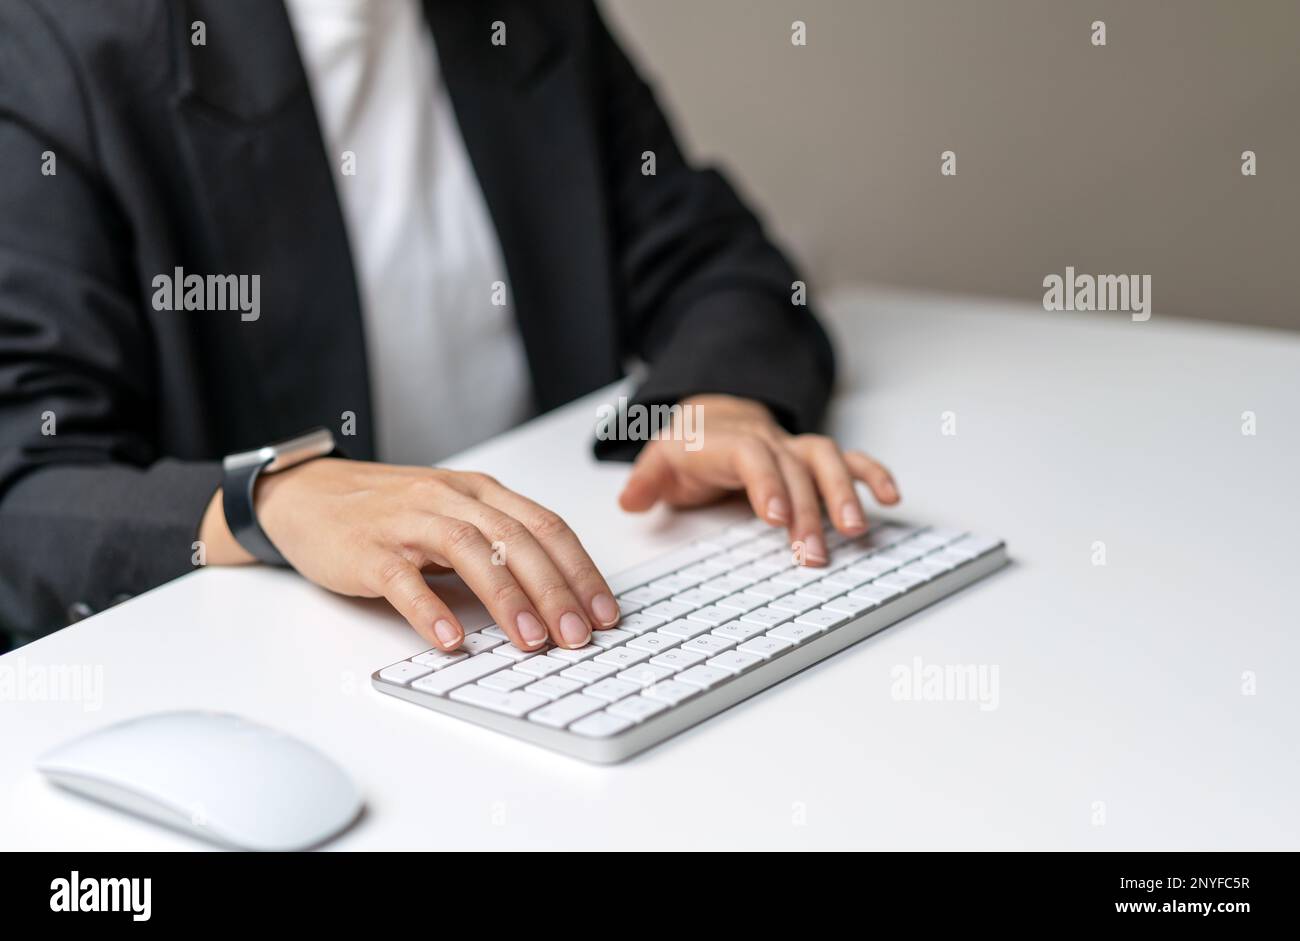 Female hands typing on wireless computer keyboard. Stock Photo